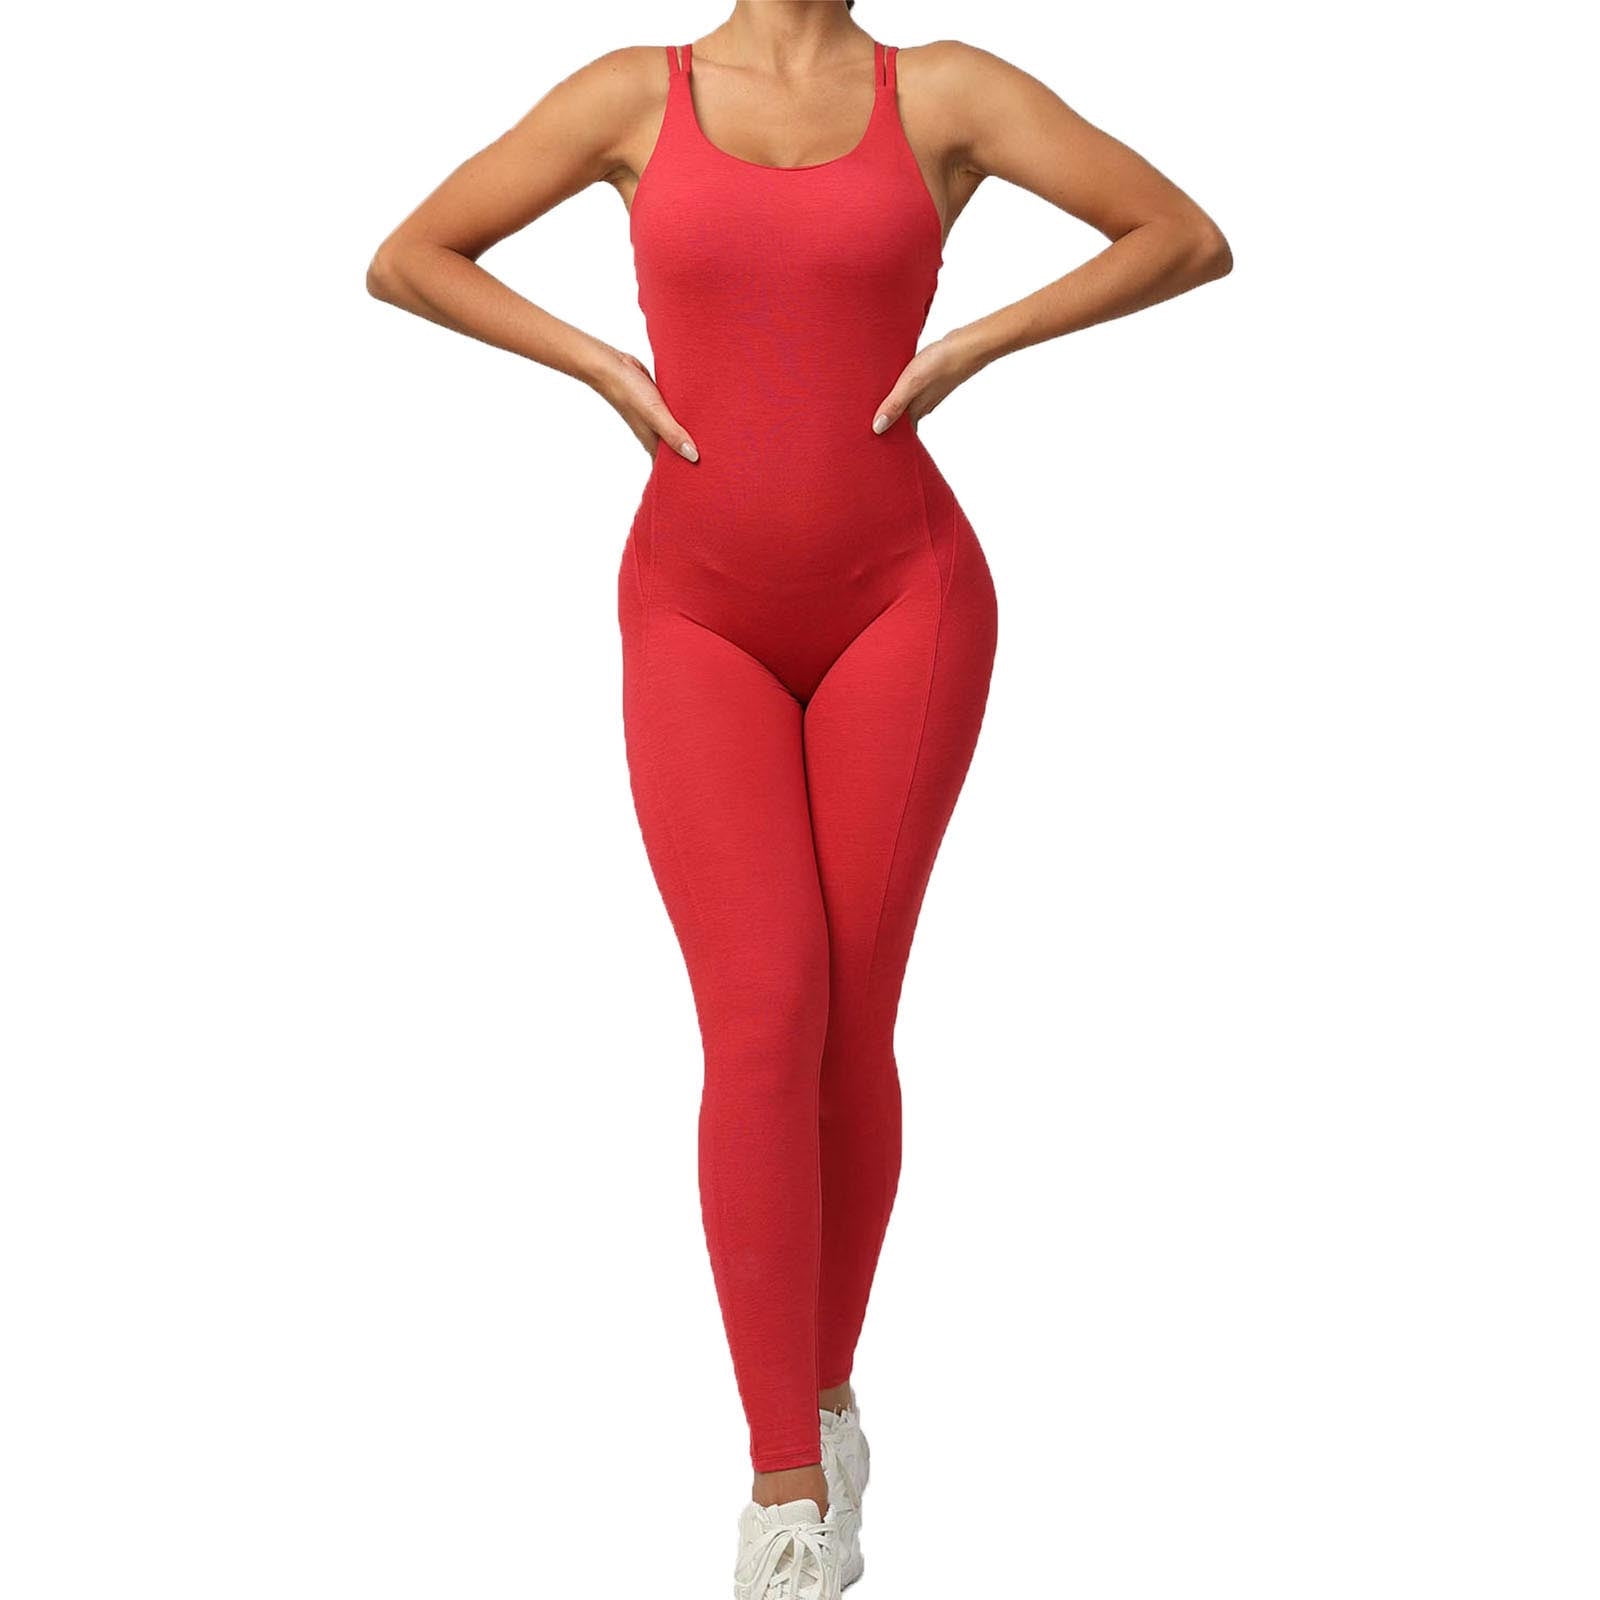 WYGH Women's Sports Yoga Jumpsuit Fitness Gym Dance One-Piece